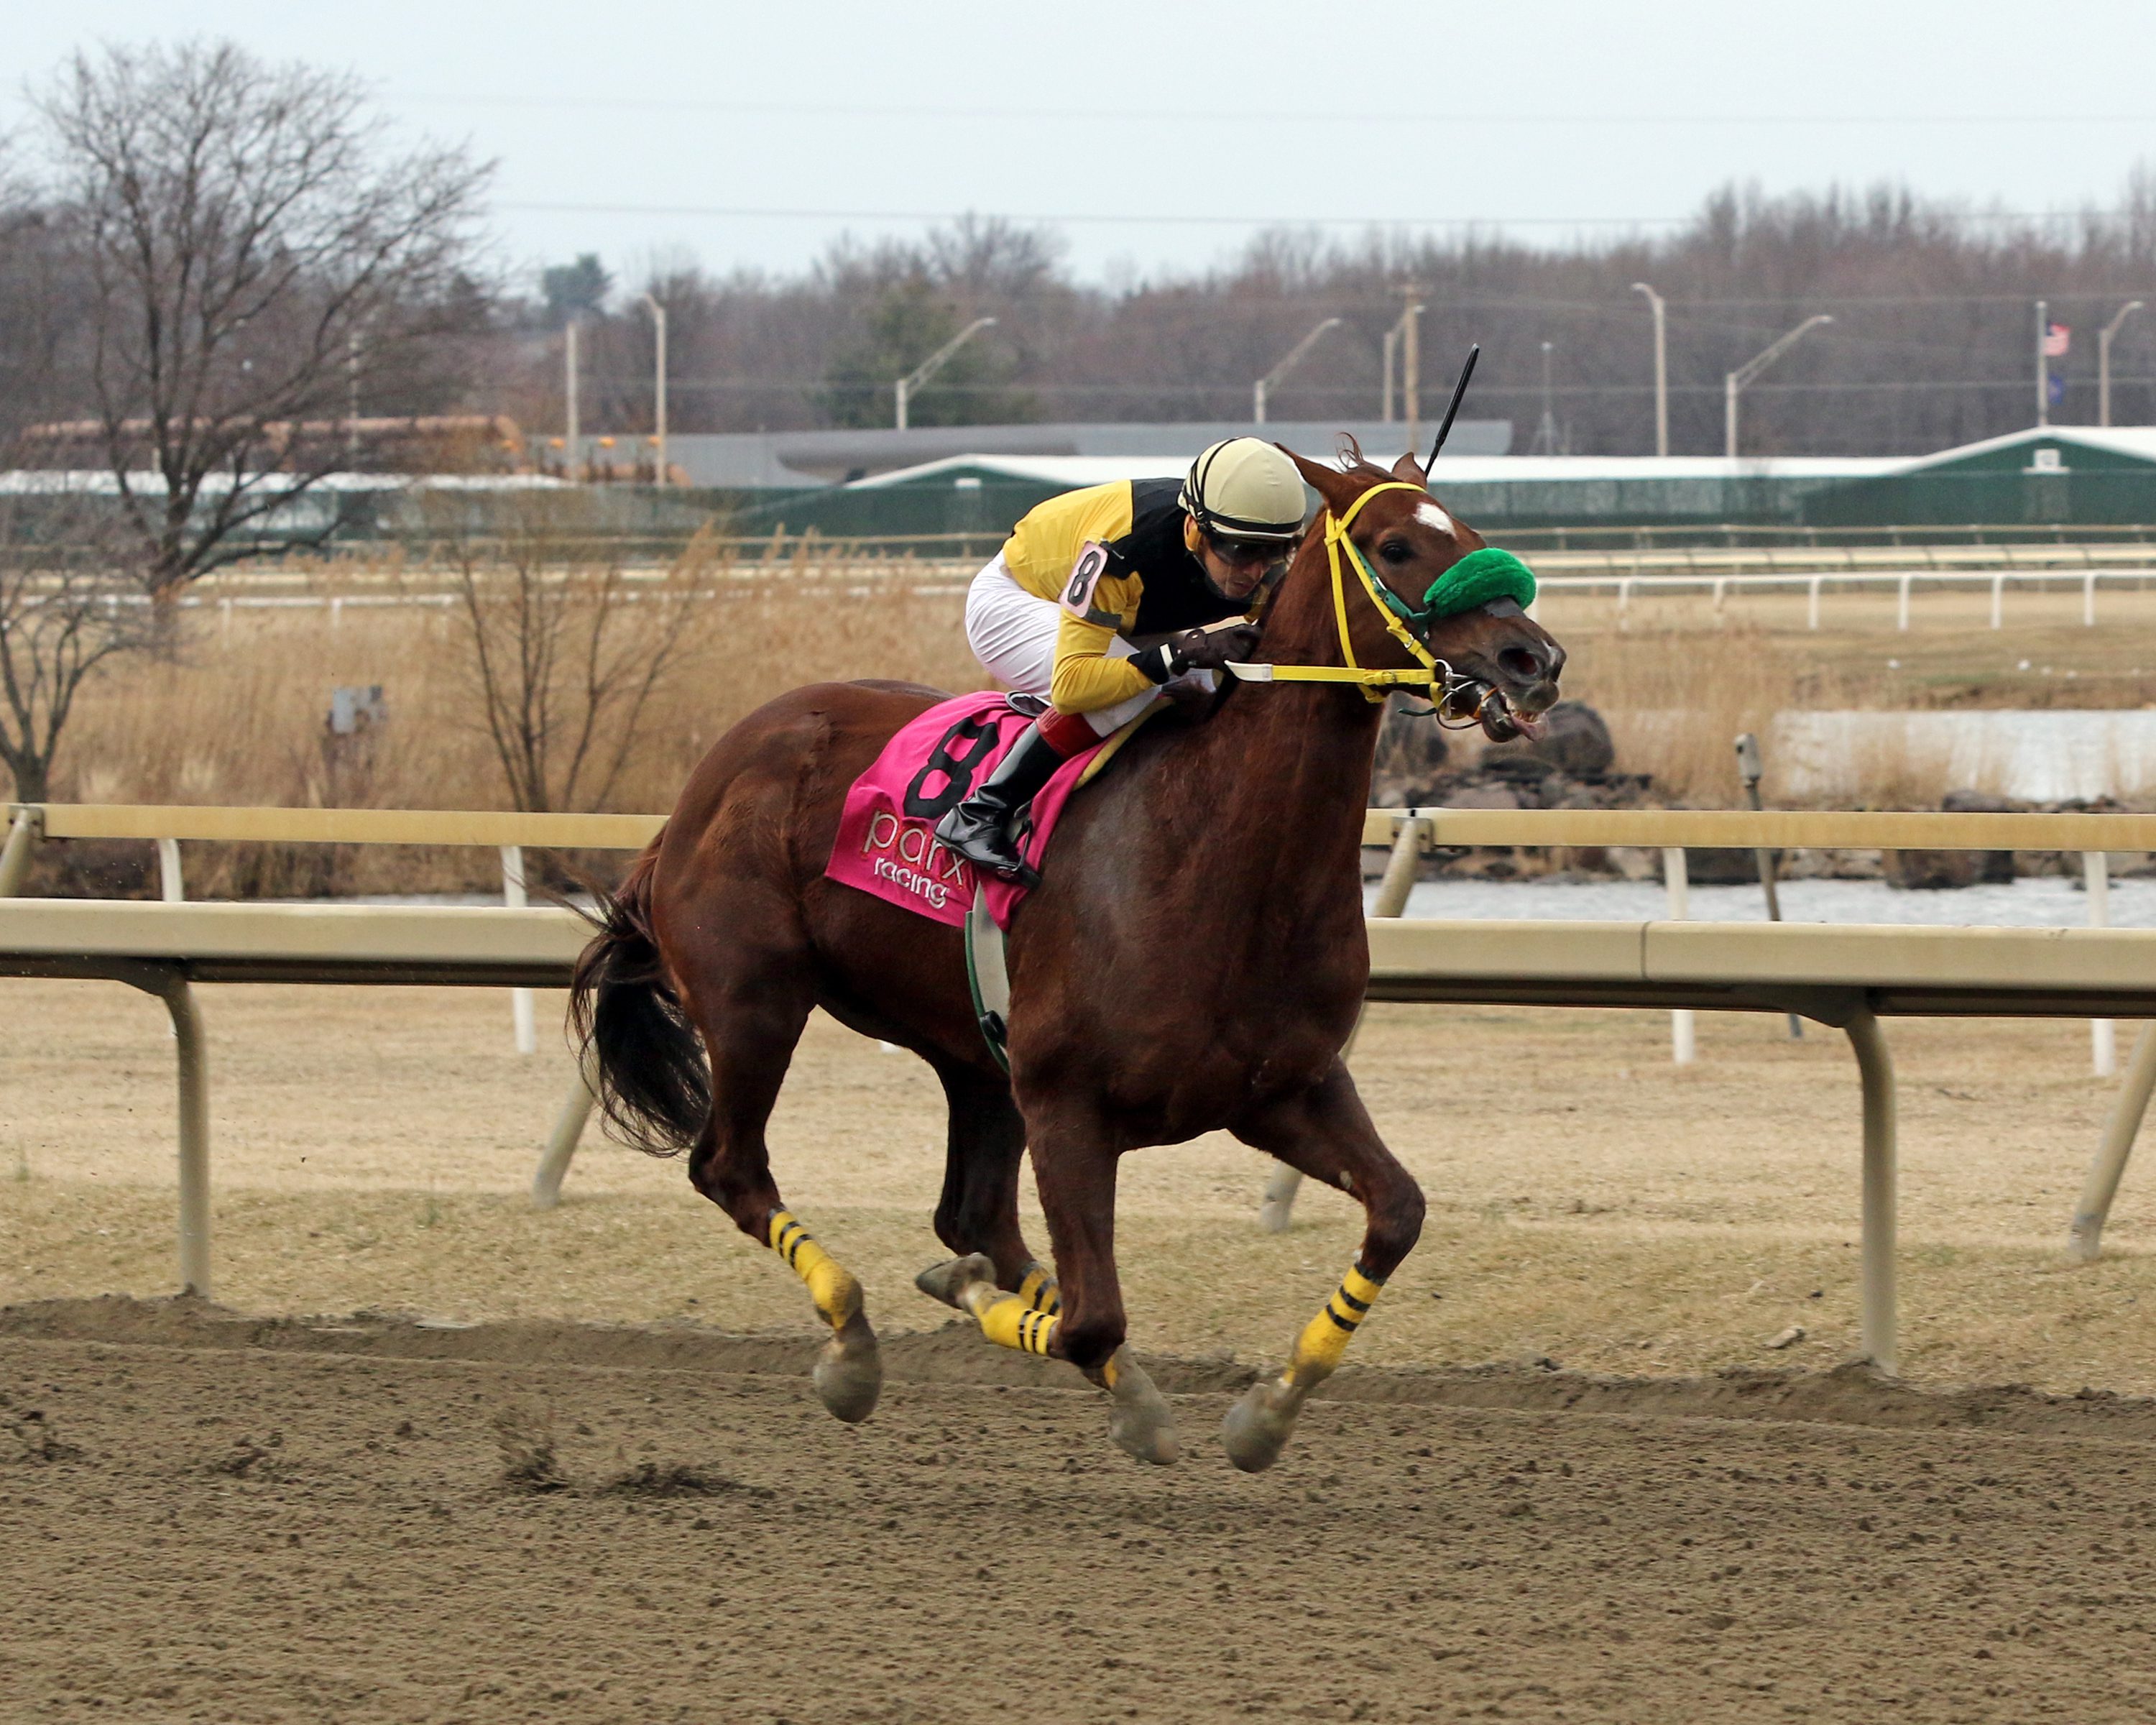 Admiral Eastwood with Silvestre Gonzalez win Race 6 at Parx on March 7, 2022. Photo By: Chad B. Harmon